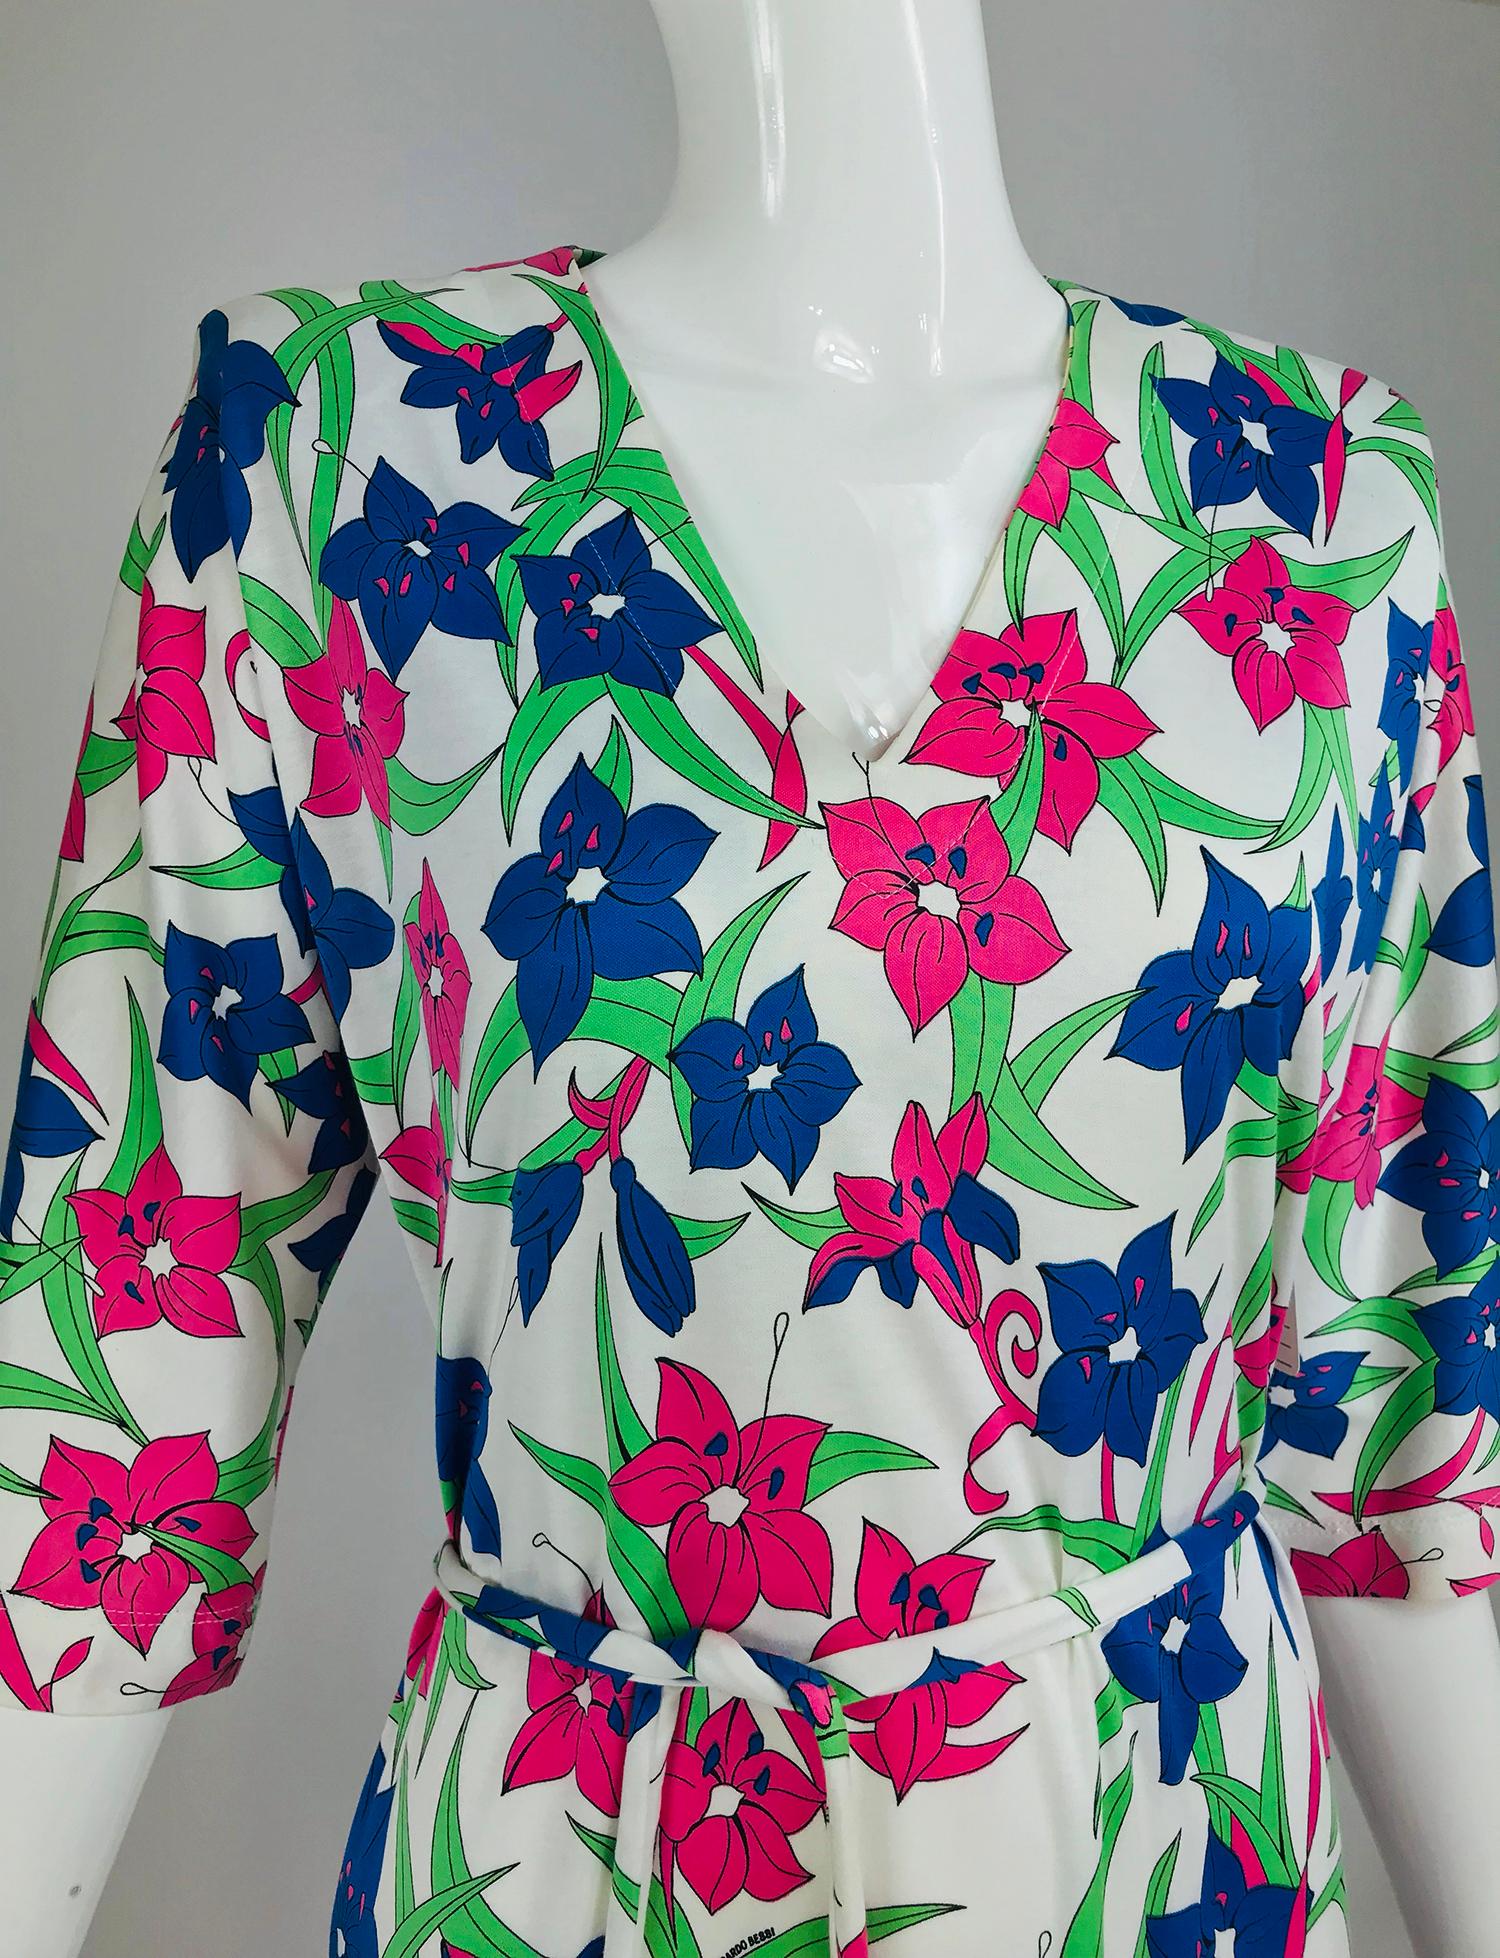 Miss Bessi Floral Fine Cotton Lisle Knit Day Dress 1990s. Simple shift dress in luxurious, lustrous cotton Lisle knit. The print is vivid with lillies in marine blue, grass green and bright pink on a white ground. V neck dress has 3/4 length raglan